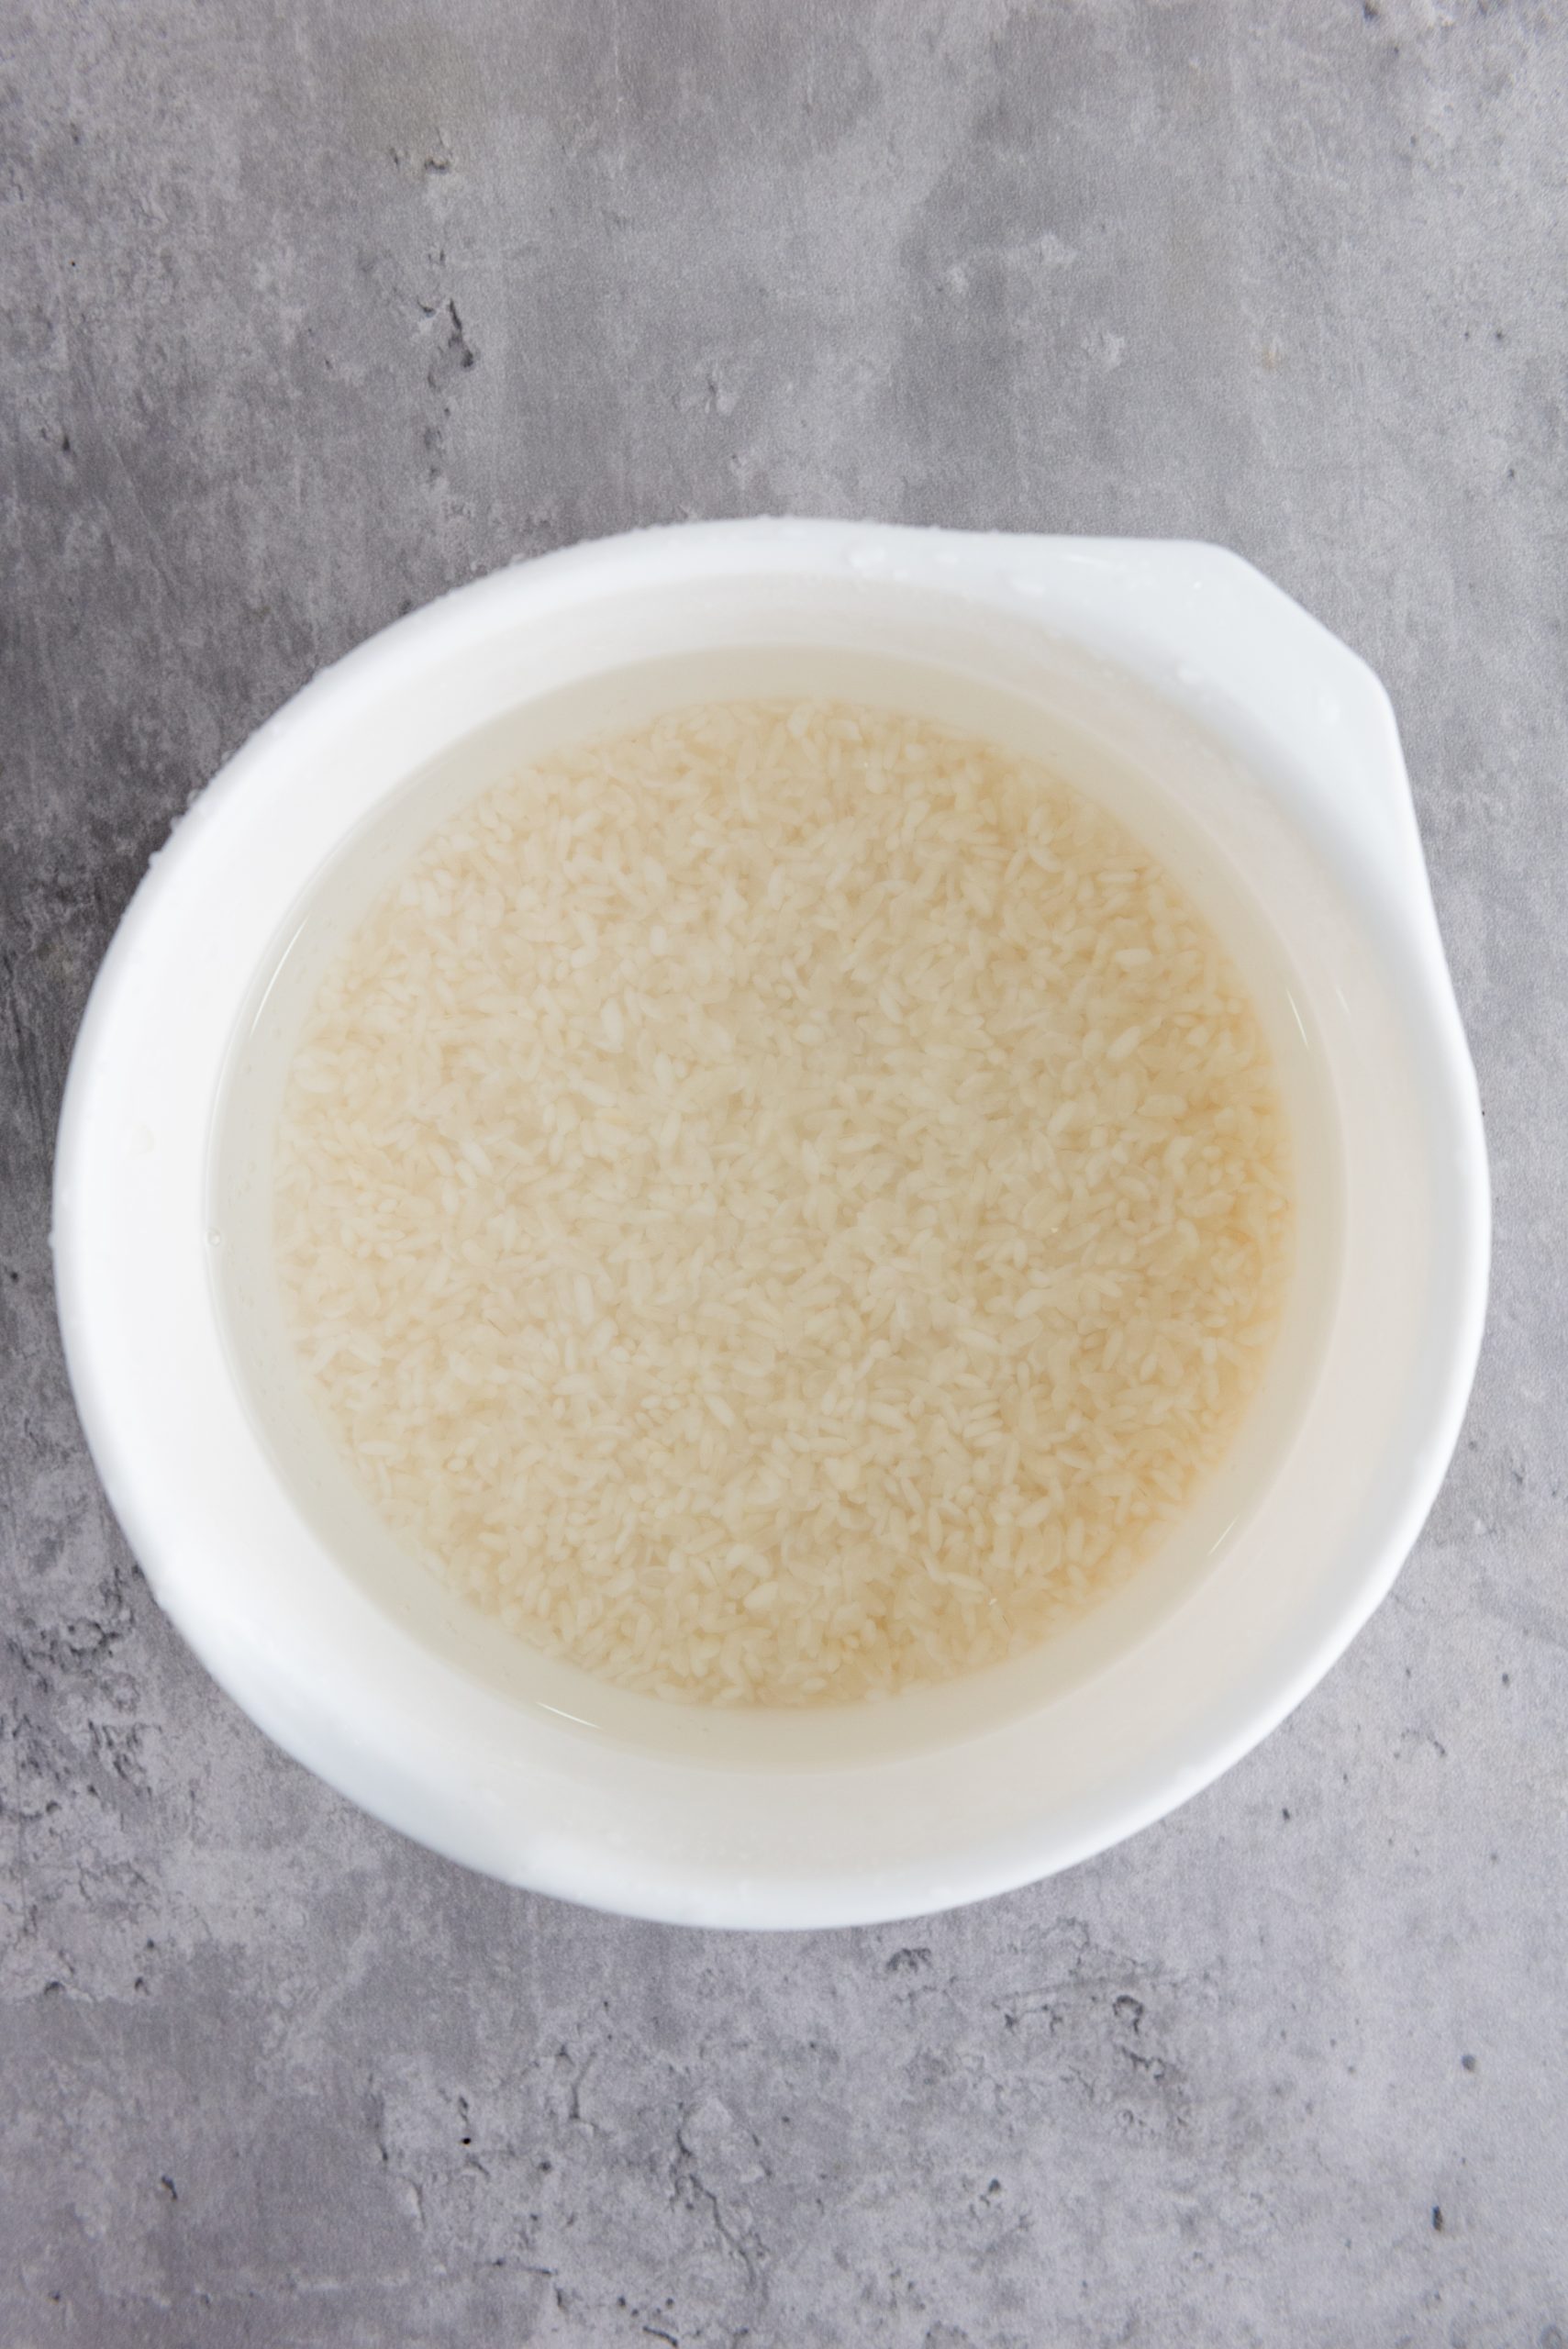 rice in a white bowl soaking in water